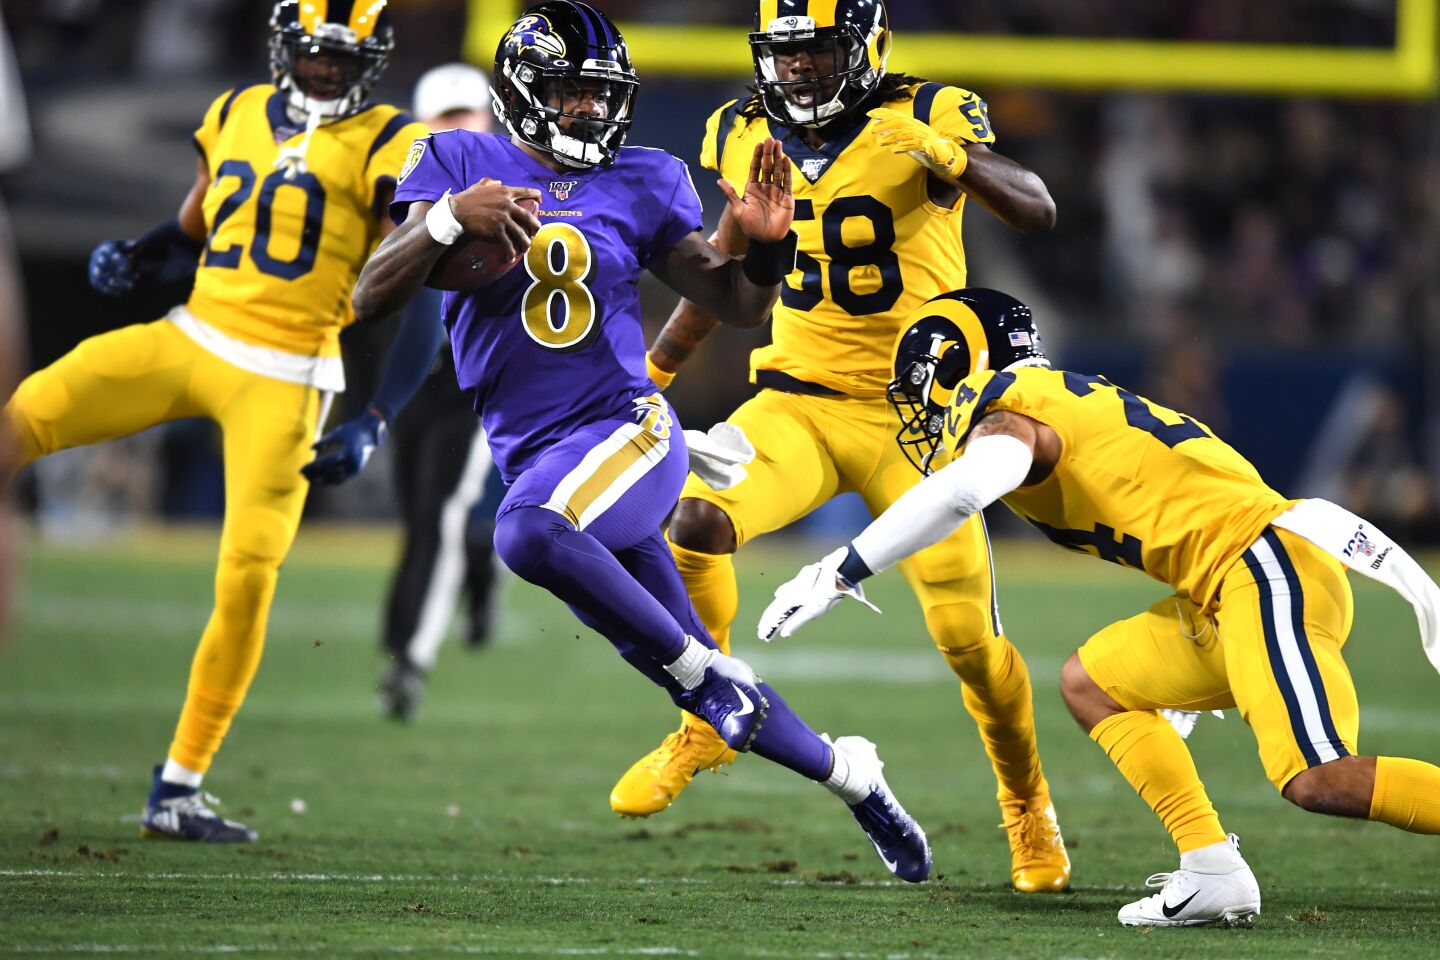 Ravens quarterback Lamar Jackson picks up a big gain in front of Rams Jalen Ramsey, Cory Littleton and Taylor Rapp during the first quarter of a game Nov. 25 at the Coliseum.